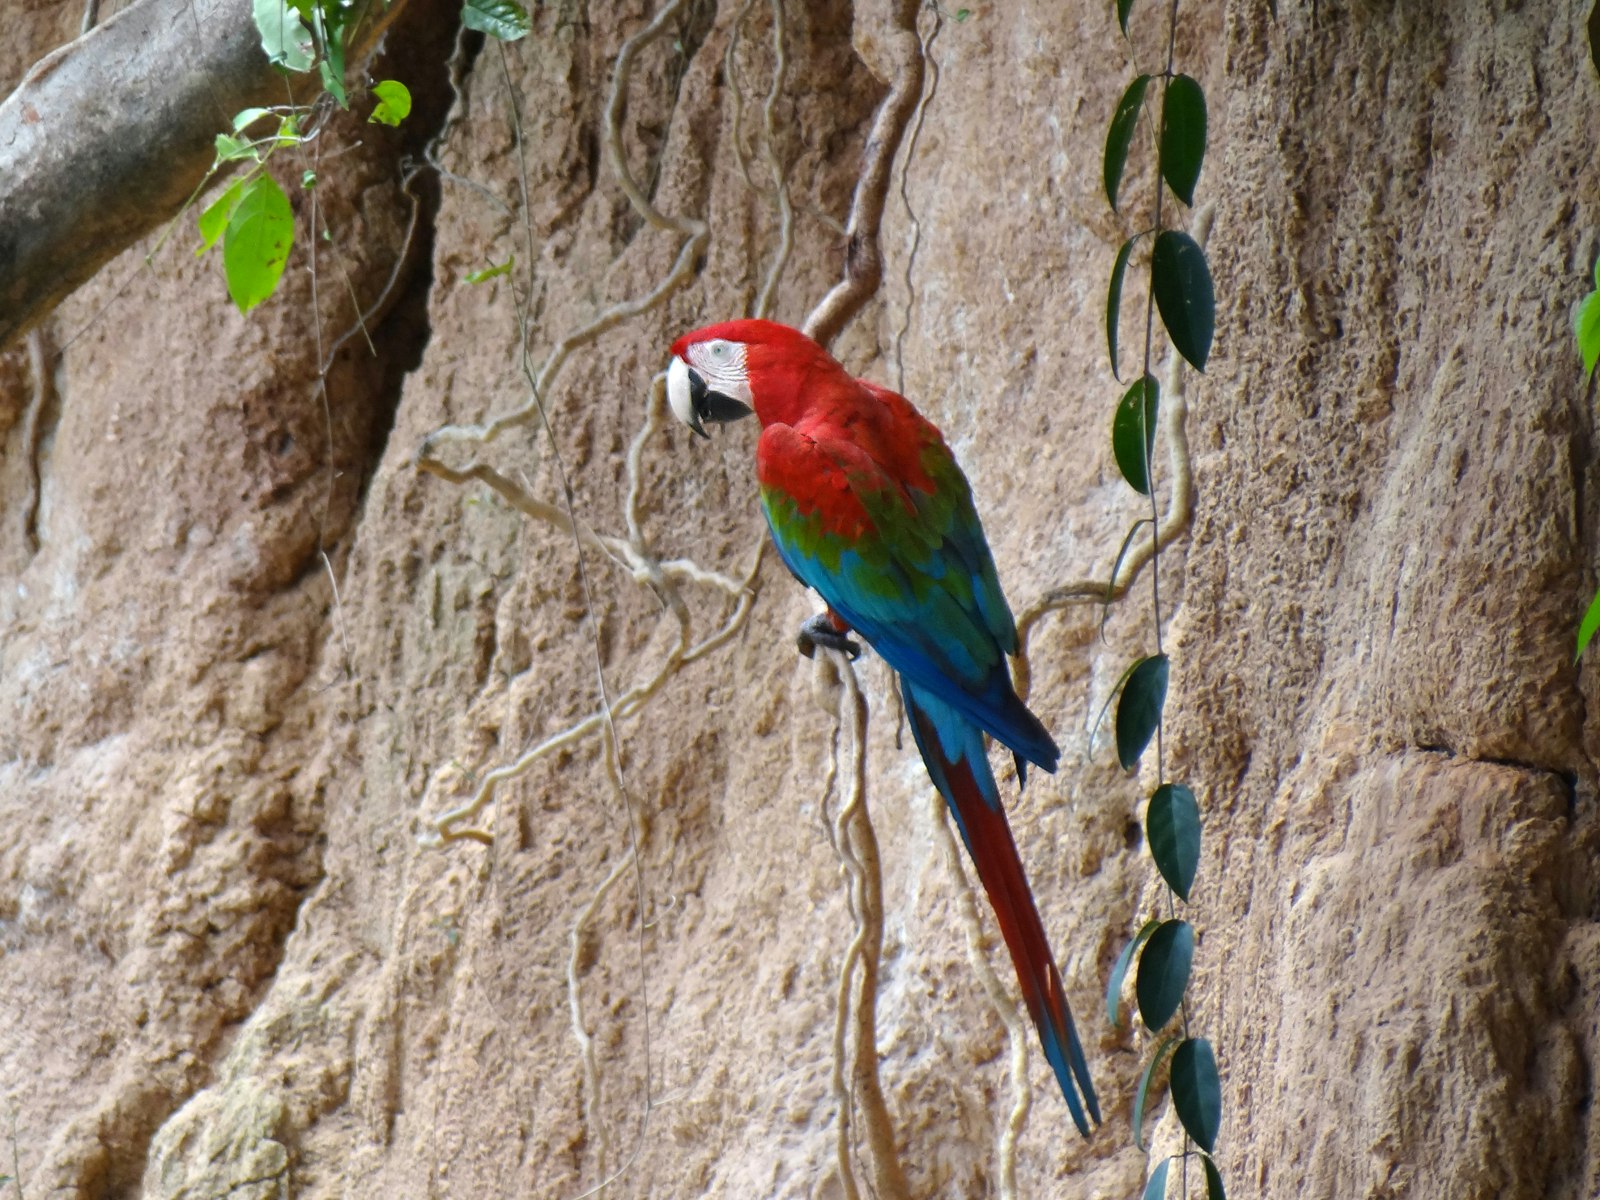 A macaw at a clay lick along the Tambopata river in the Amazon rainforest, Peru